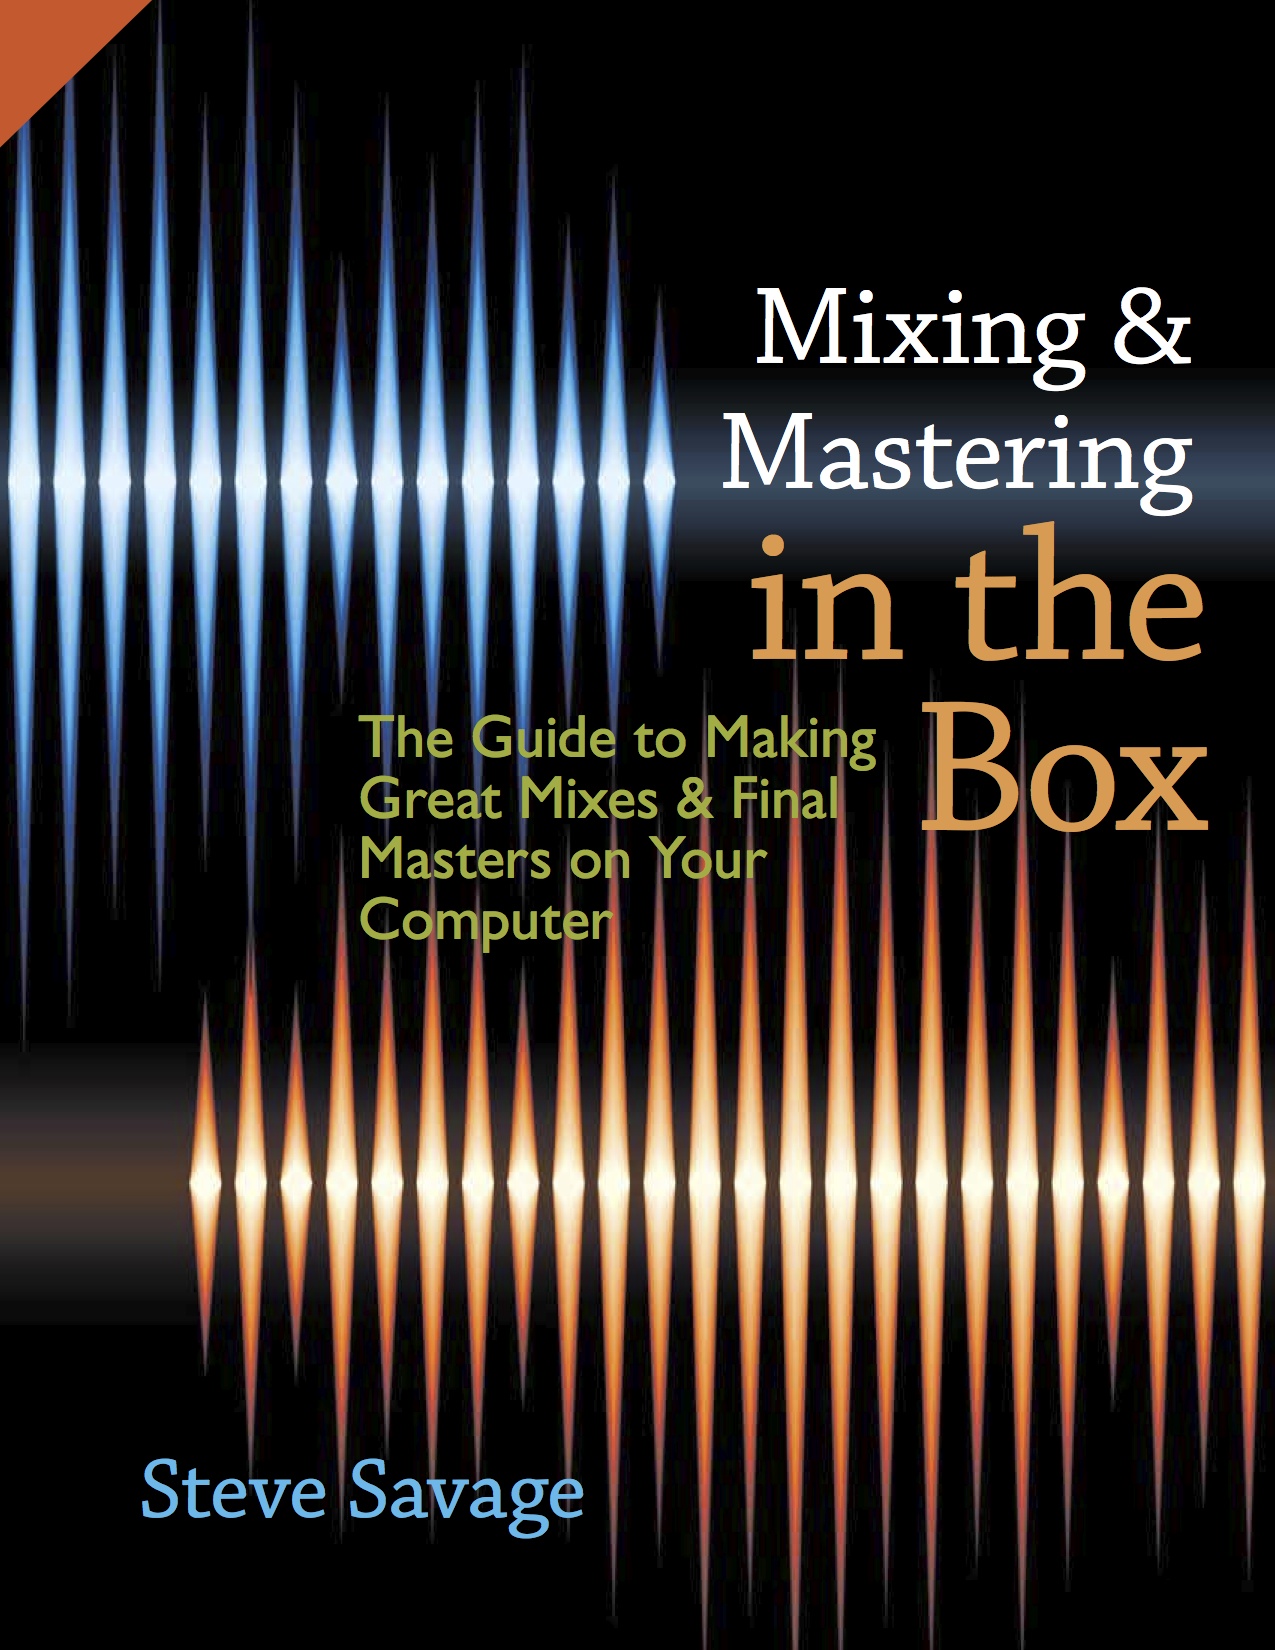 Mixing & Mastering in the Box by Steve Savage